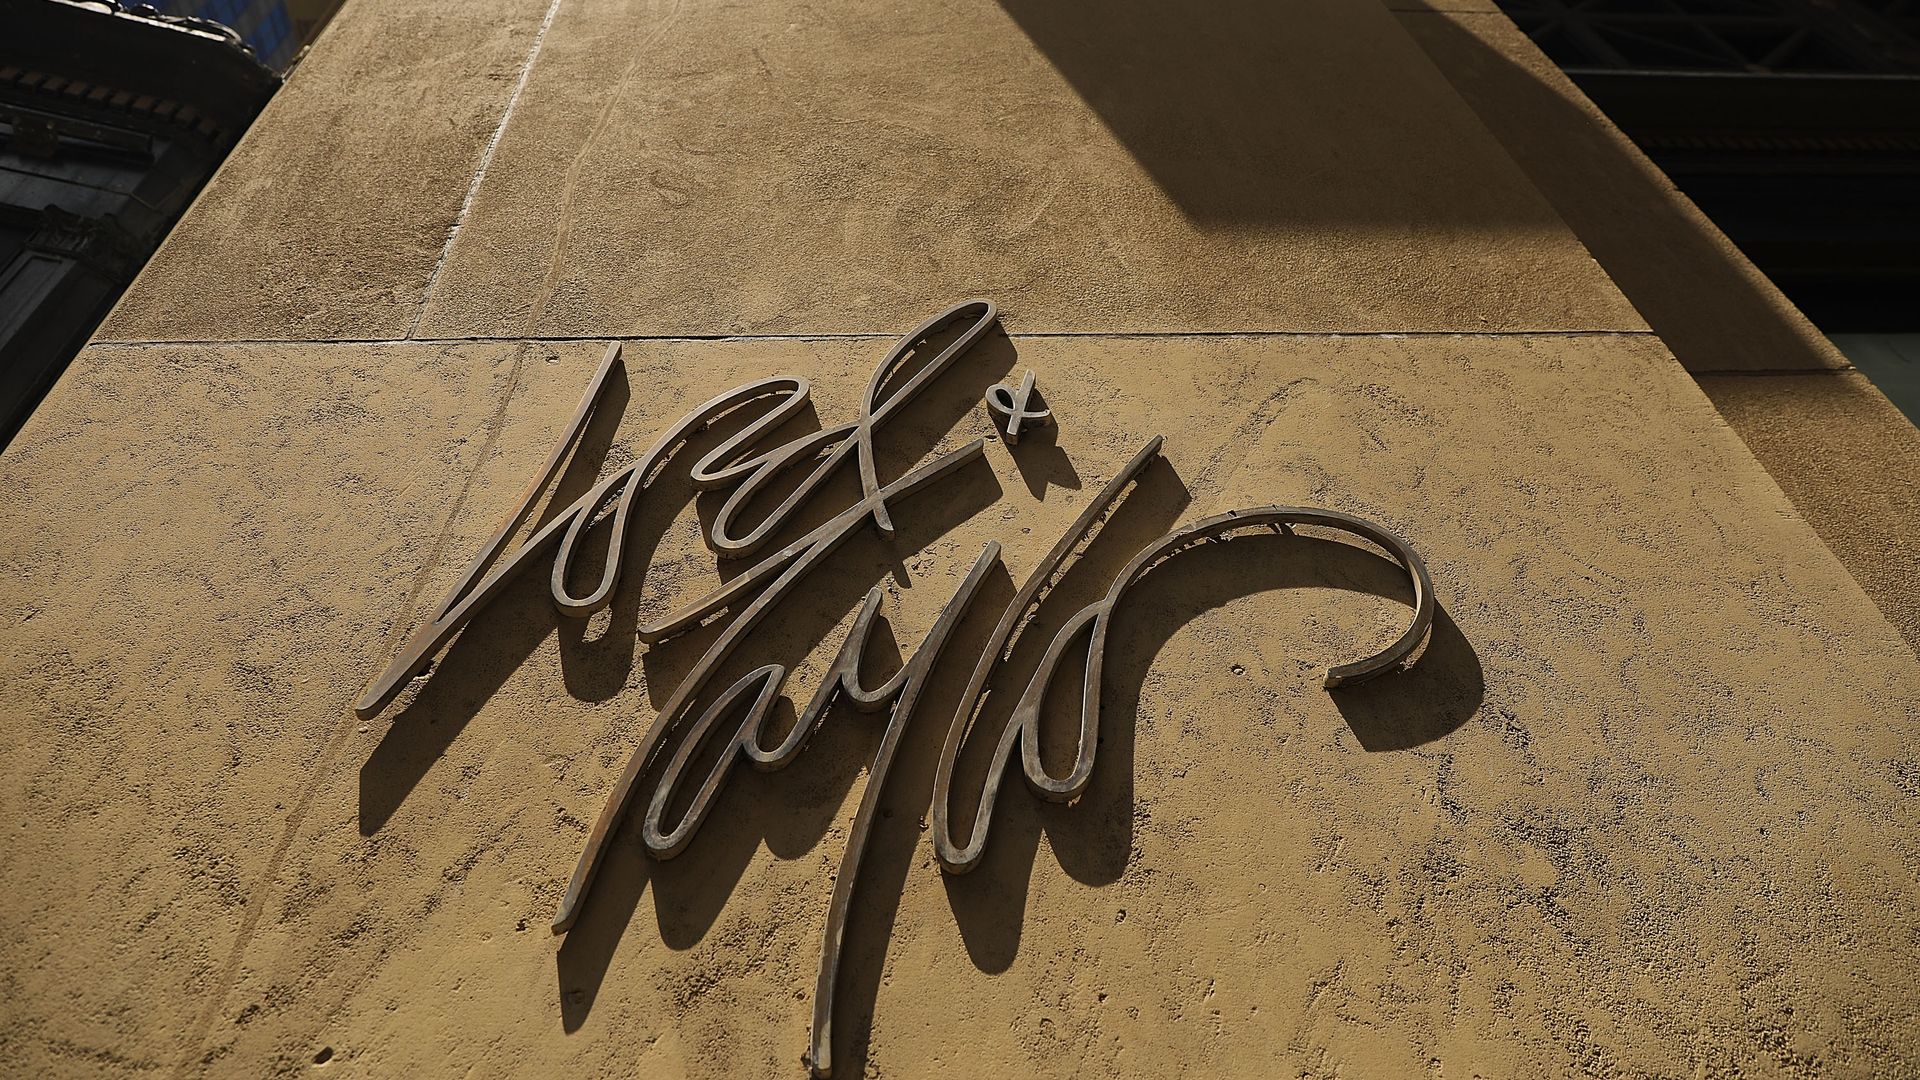 A Lord & Taylor sign